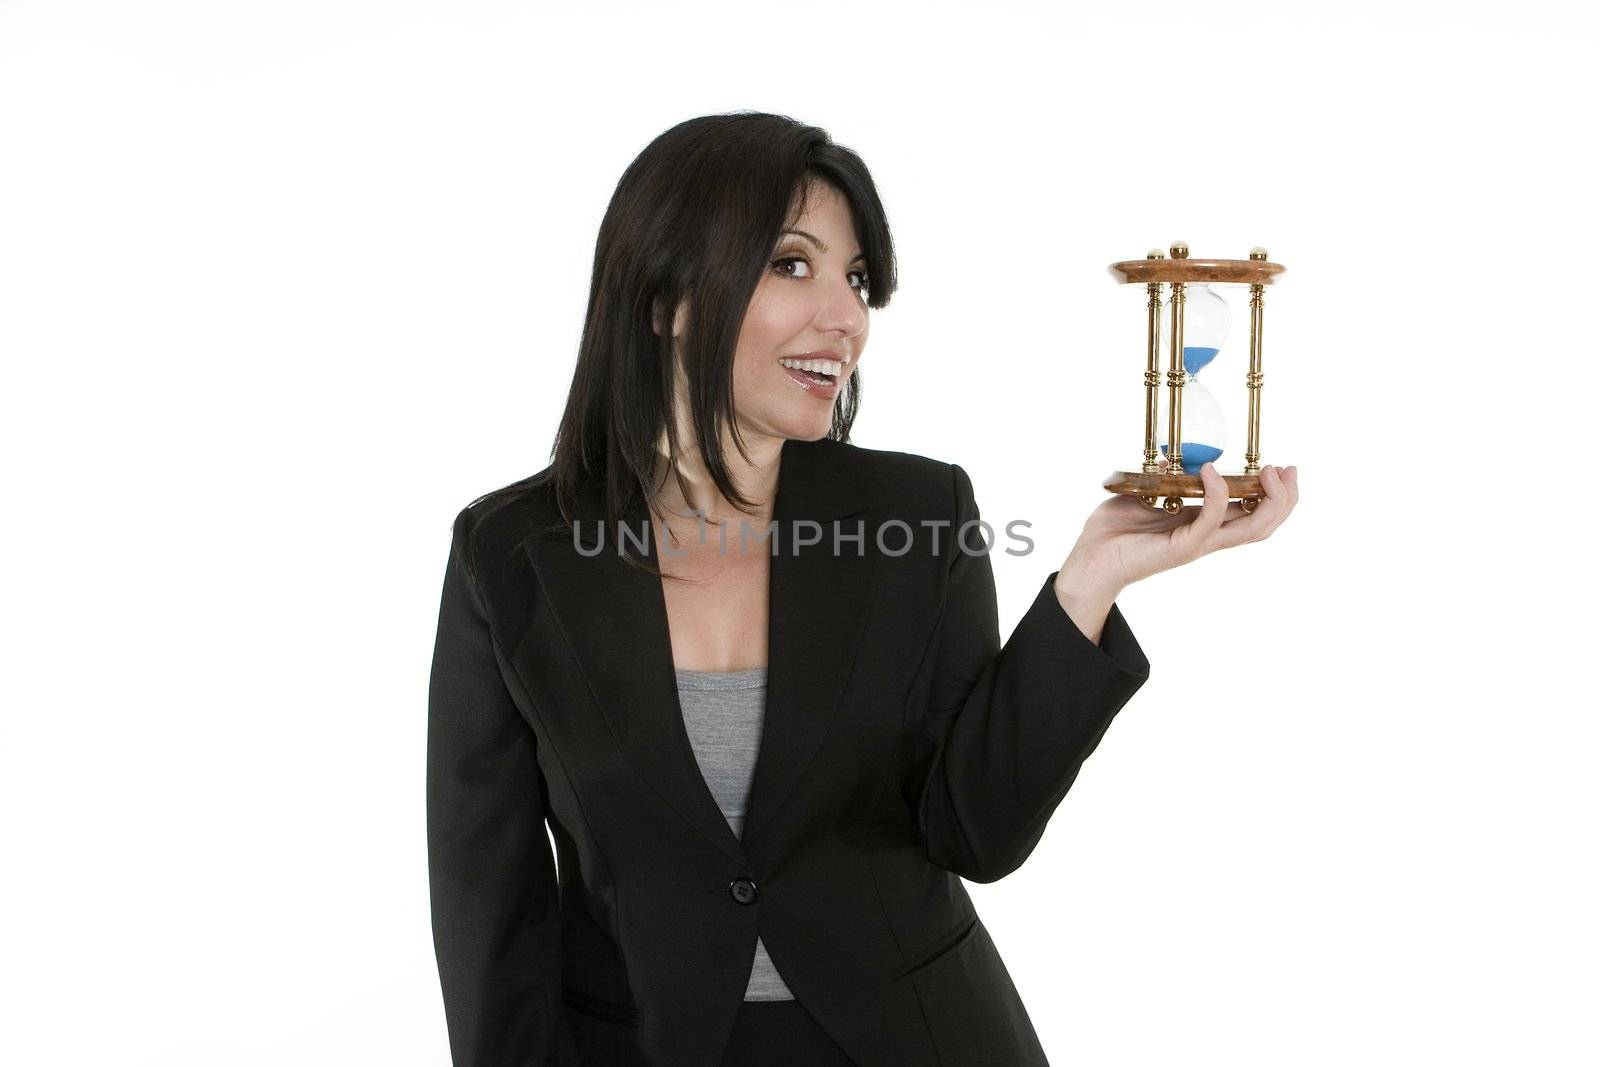 A businesswoman holding a traditional sand timer in her hand. You could change the sandtimer for another product.